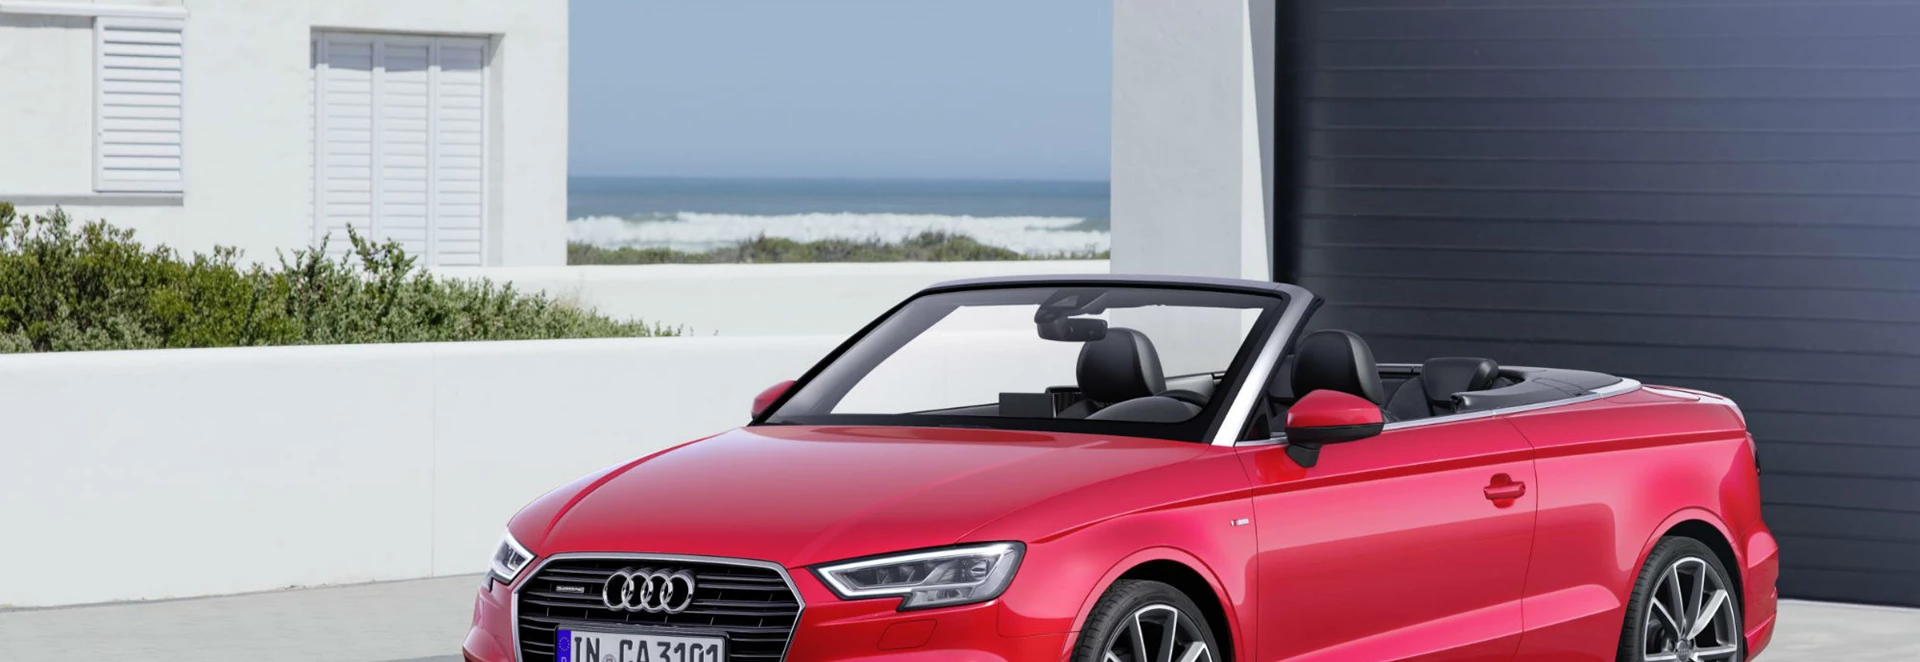 Audi A3 Cabriolet S-Line 2.0 TDI review 